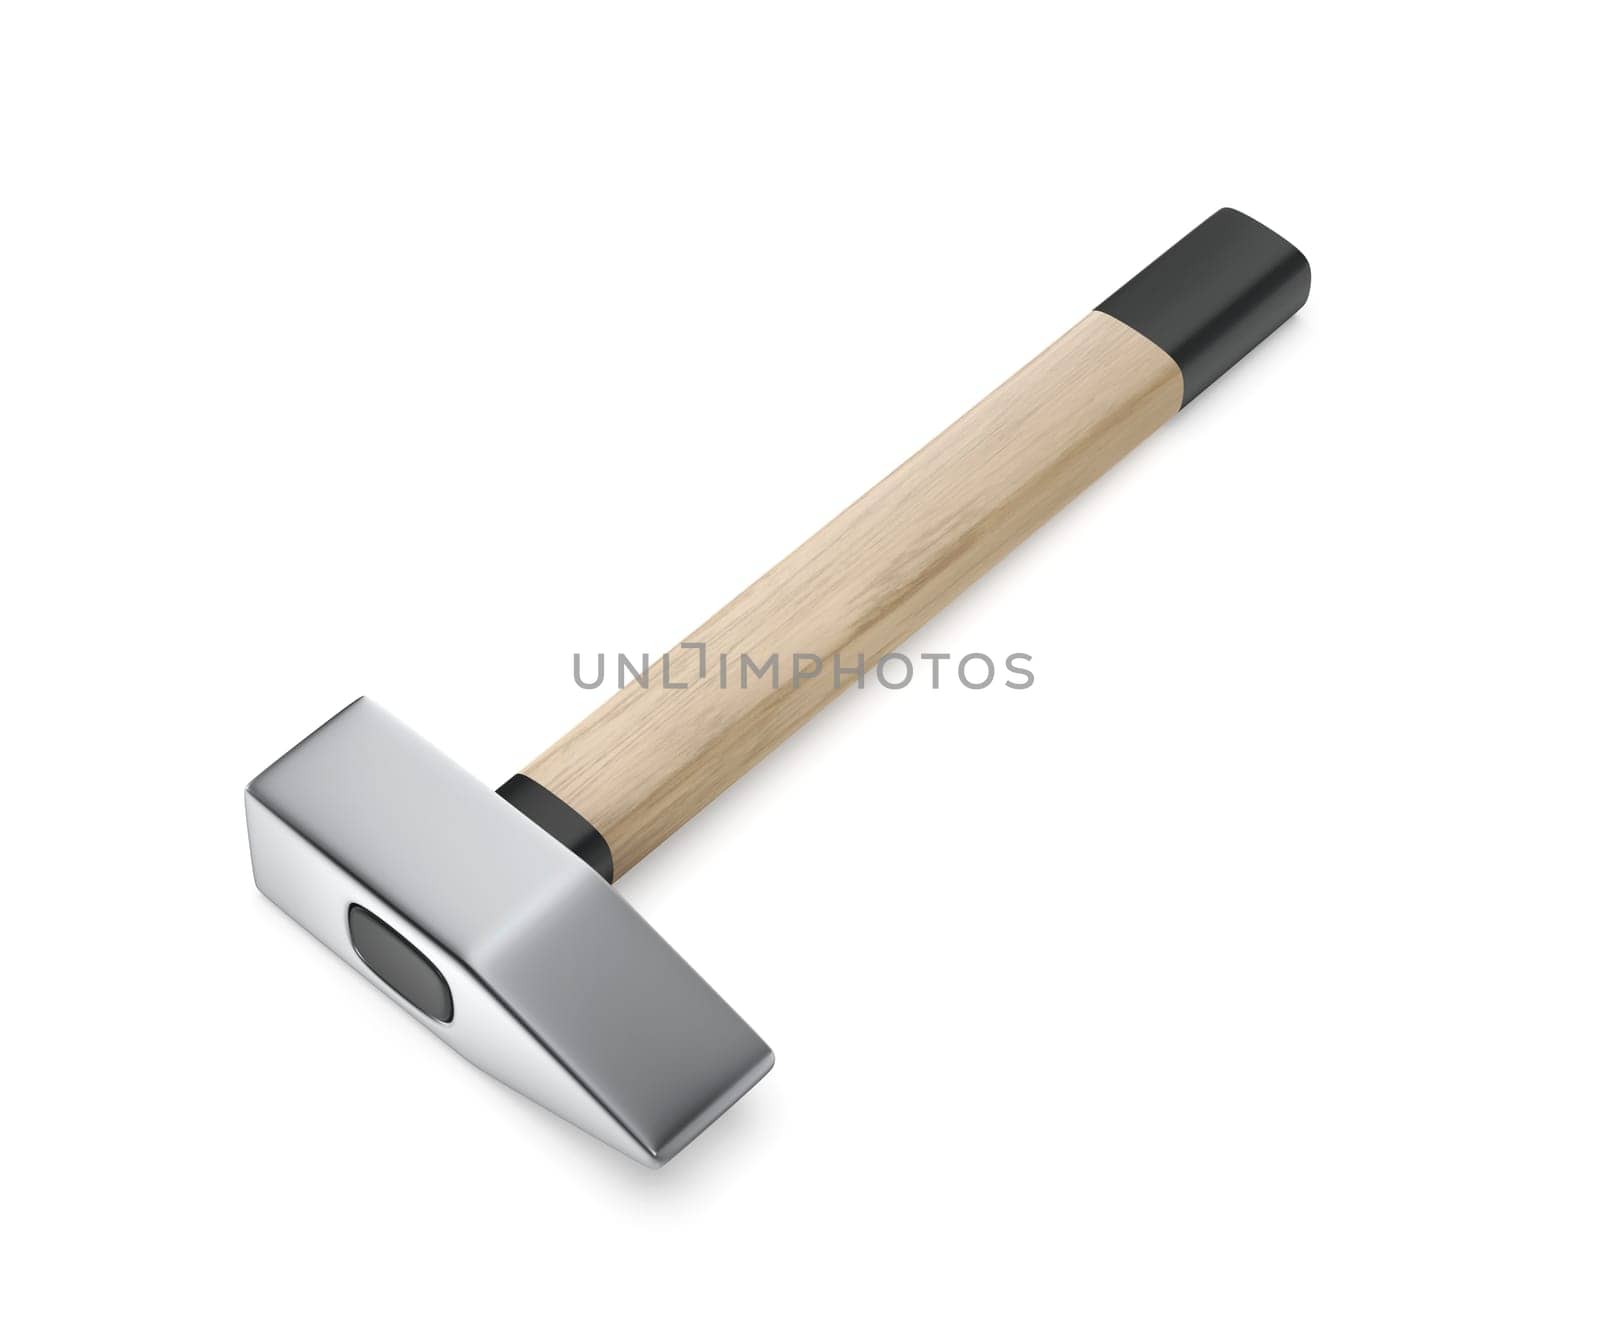 Hammer with wooden handle by magraphics